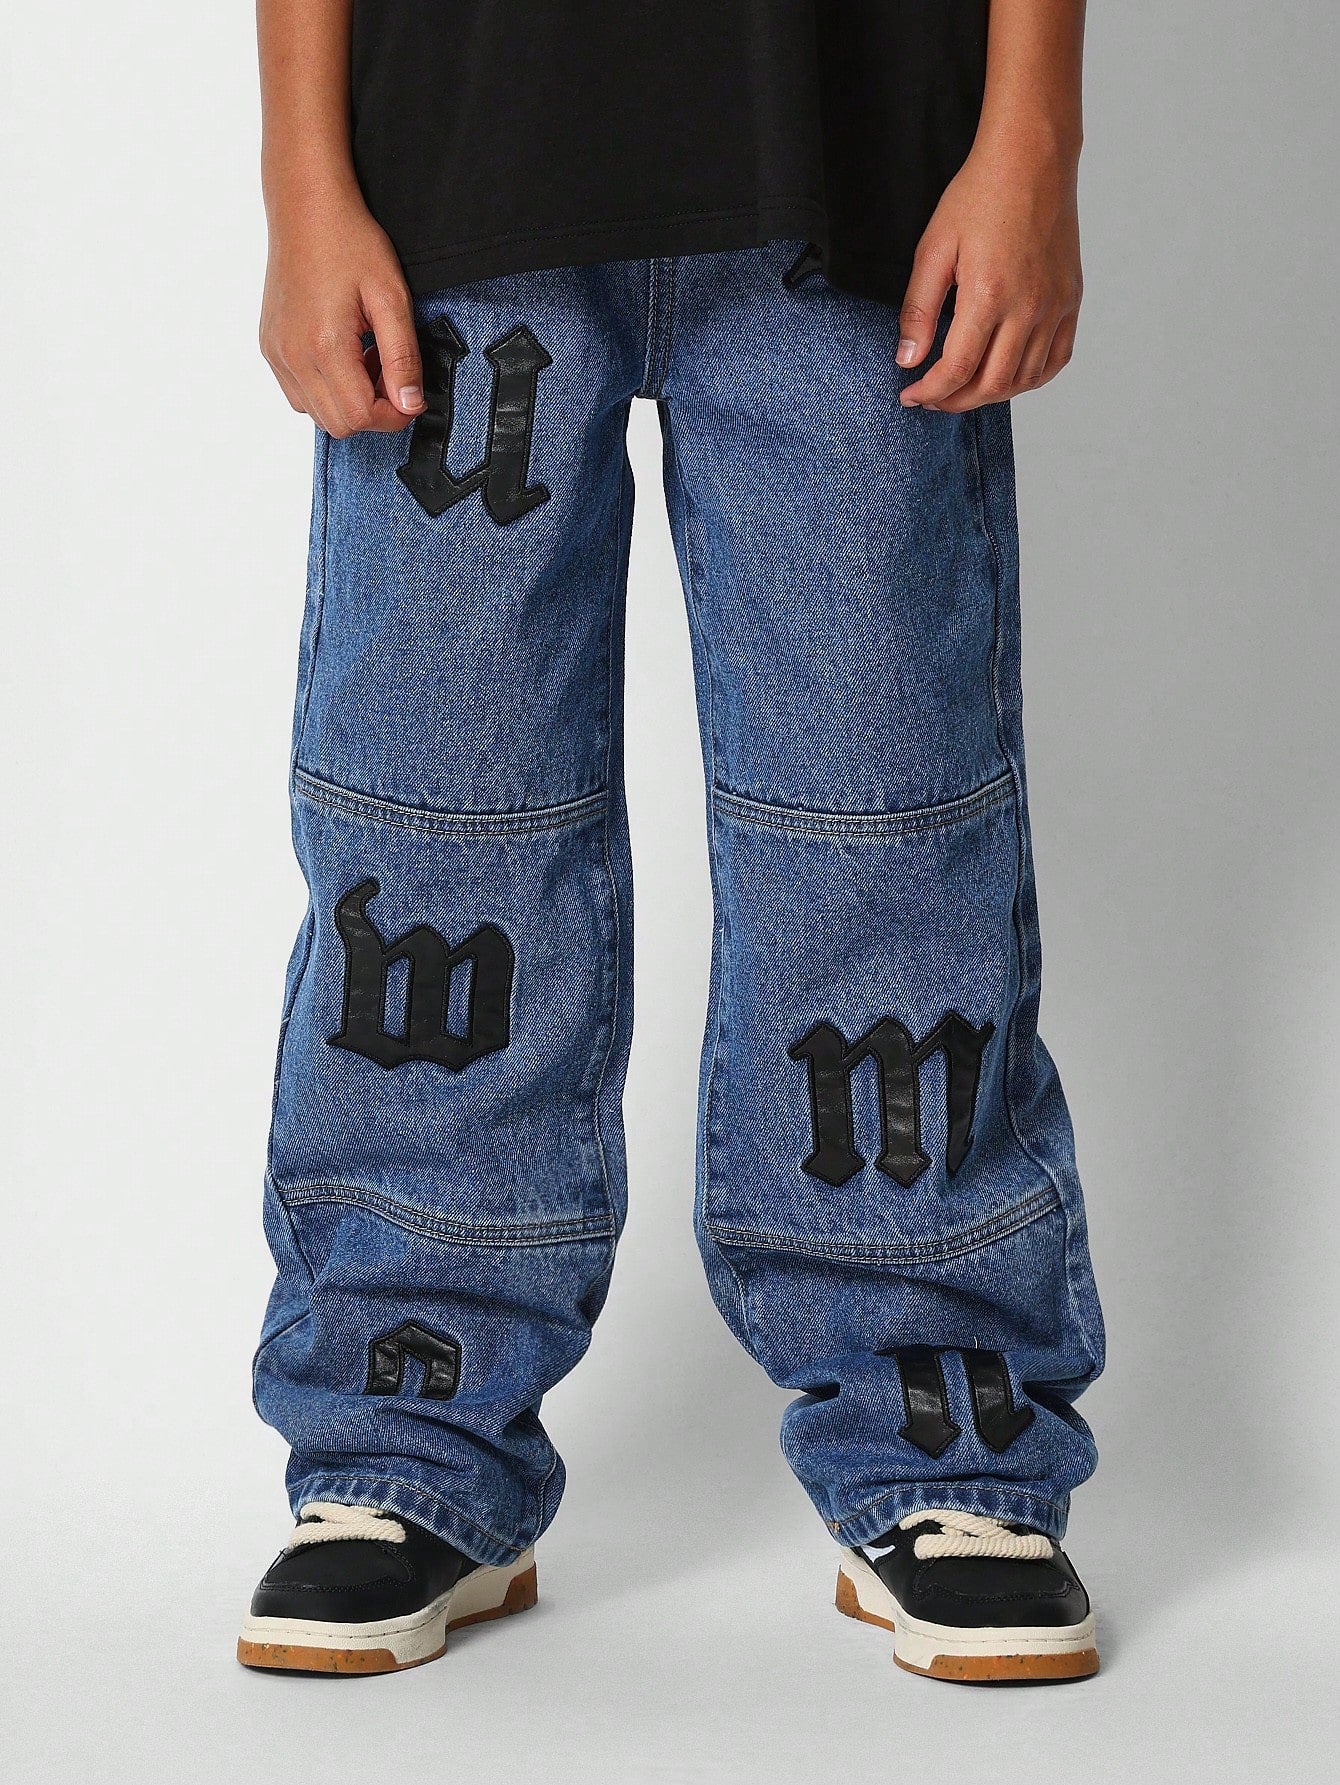 Tween Girls Jeans With Letter Embroidery Back To School